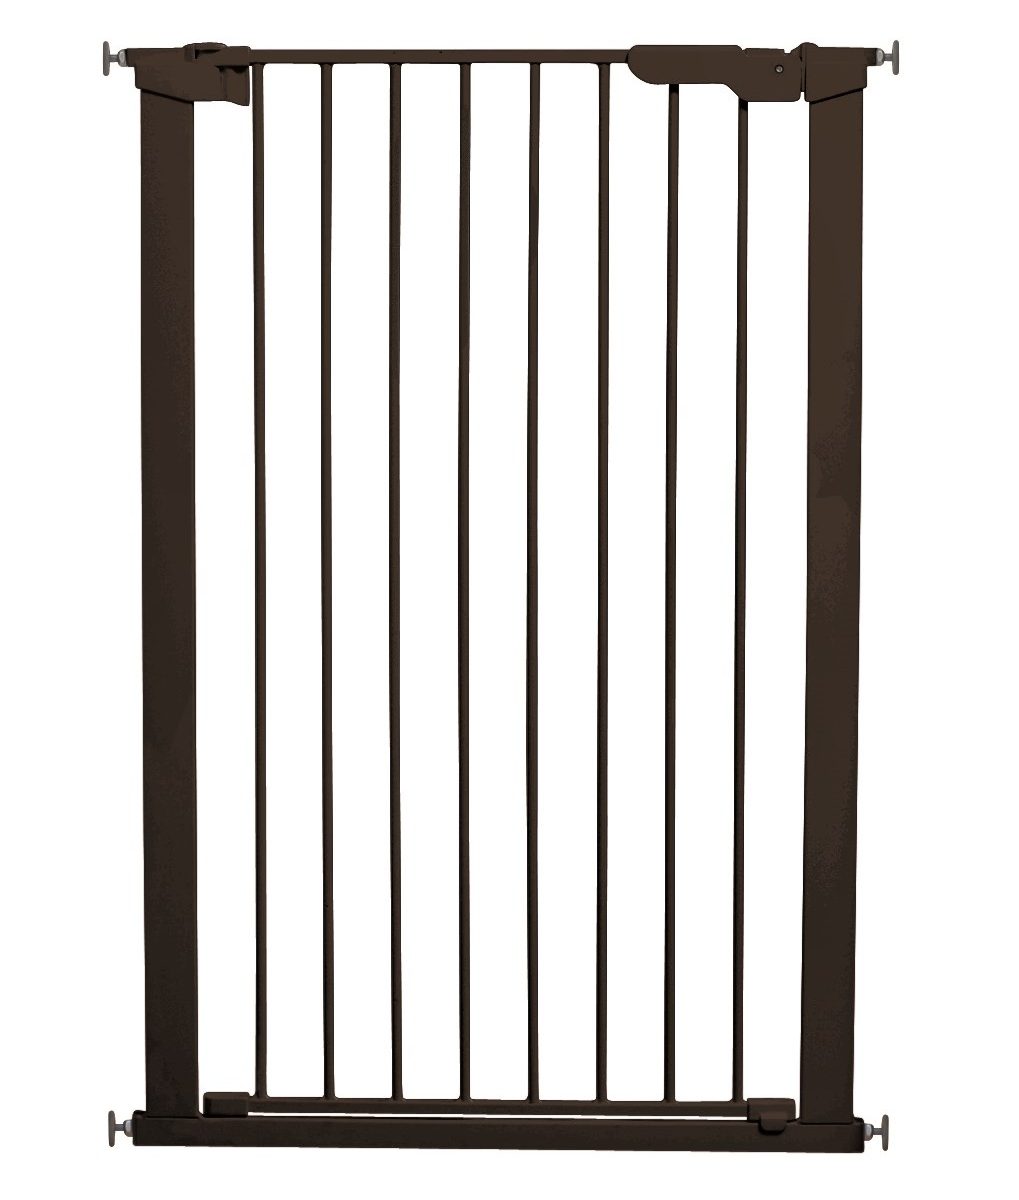 DogSpace Bonnie extra tall Pressure Fitted Pet gate, black